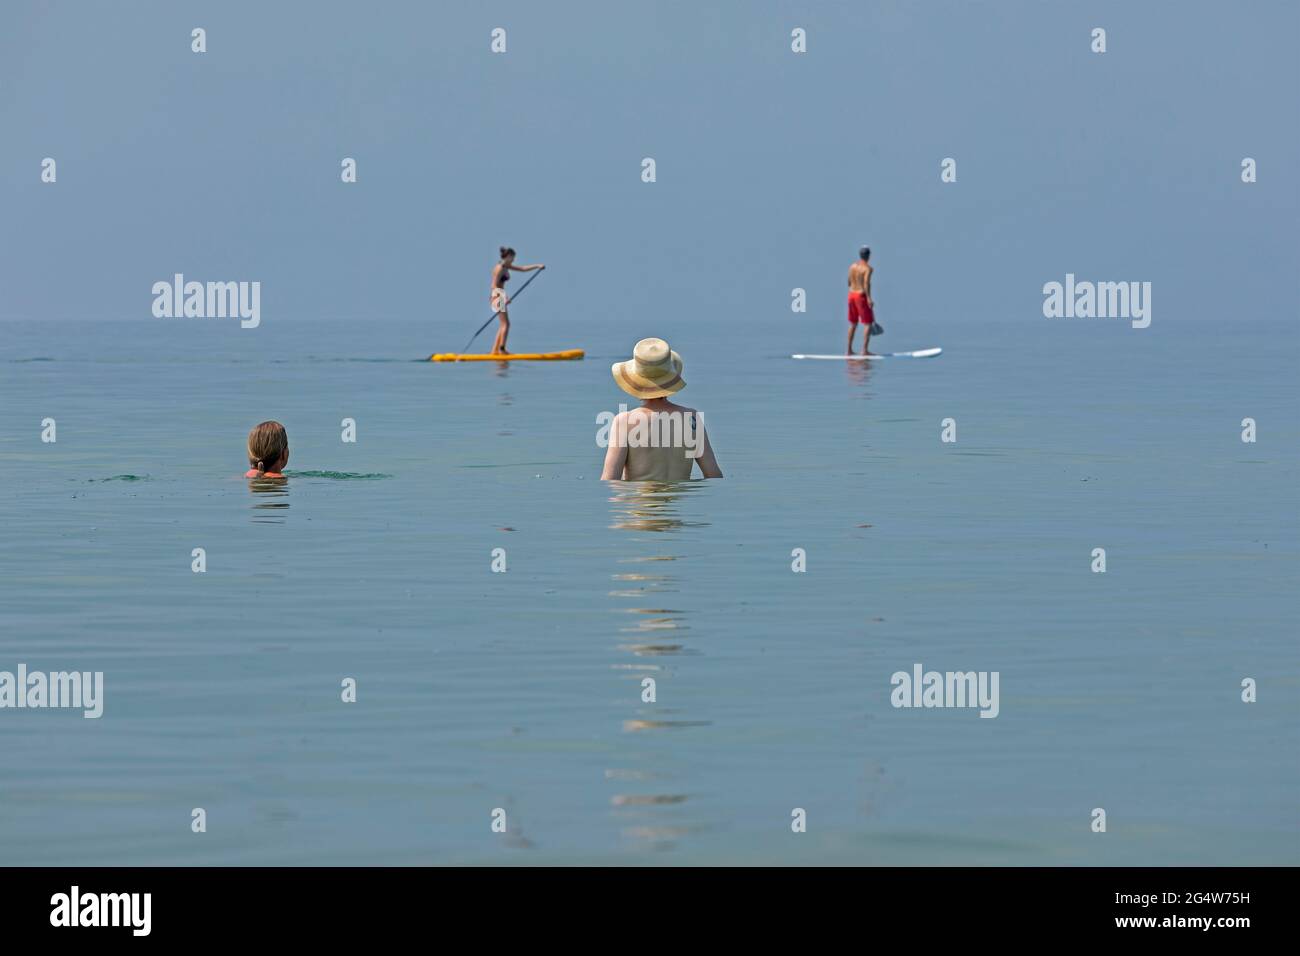 two women watching two people doing stand-up paddle boarding, Wustrow, Fischland, Mecklenburg-West Pomerania, Germany Stock Photo